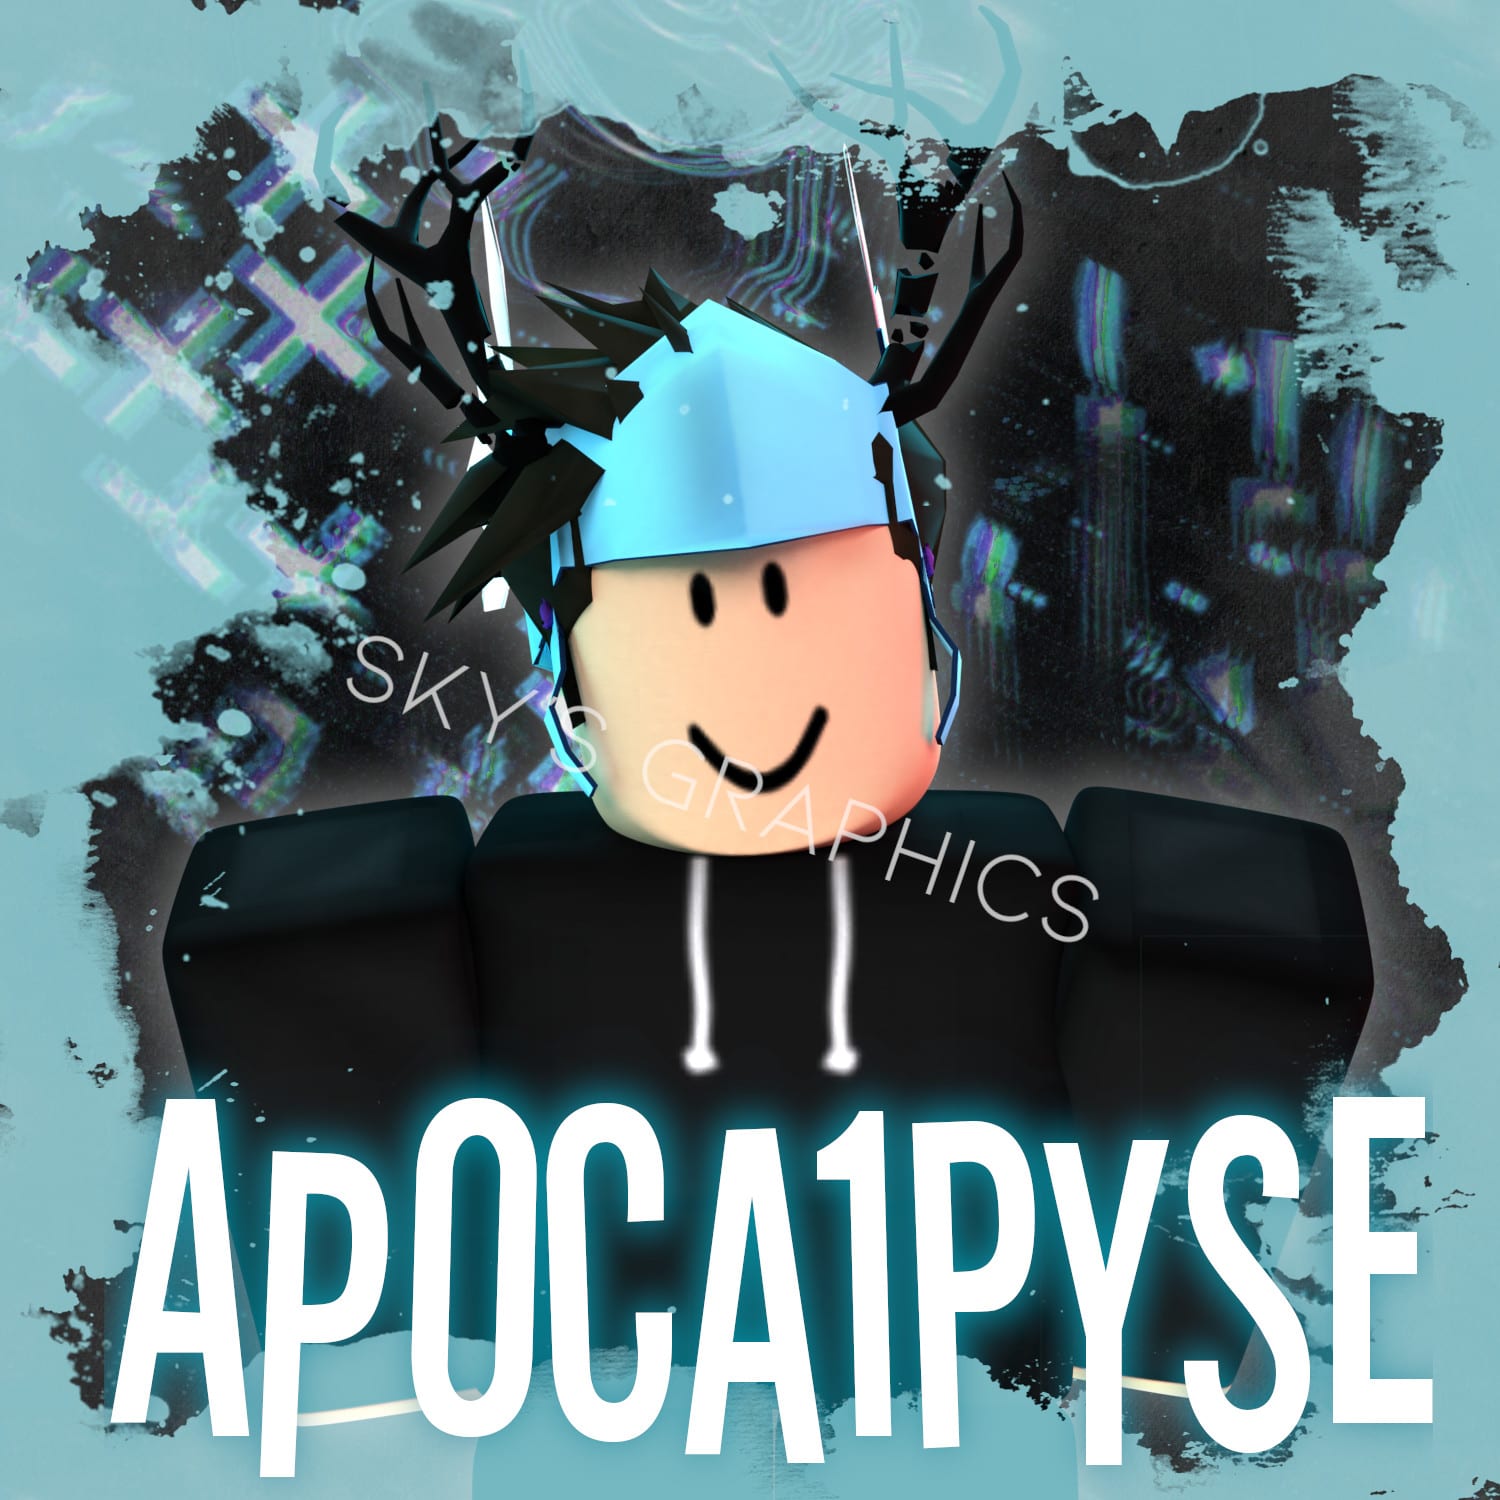 Make A Professional Roblox Gfx Of Your Character By Skiiess - animated running roblox character